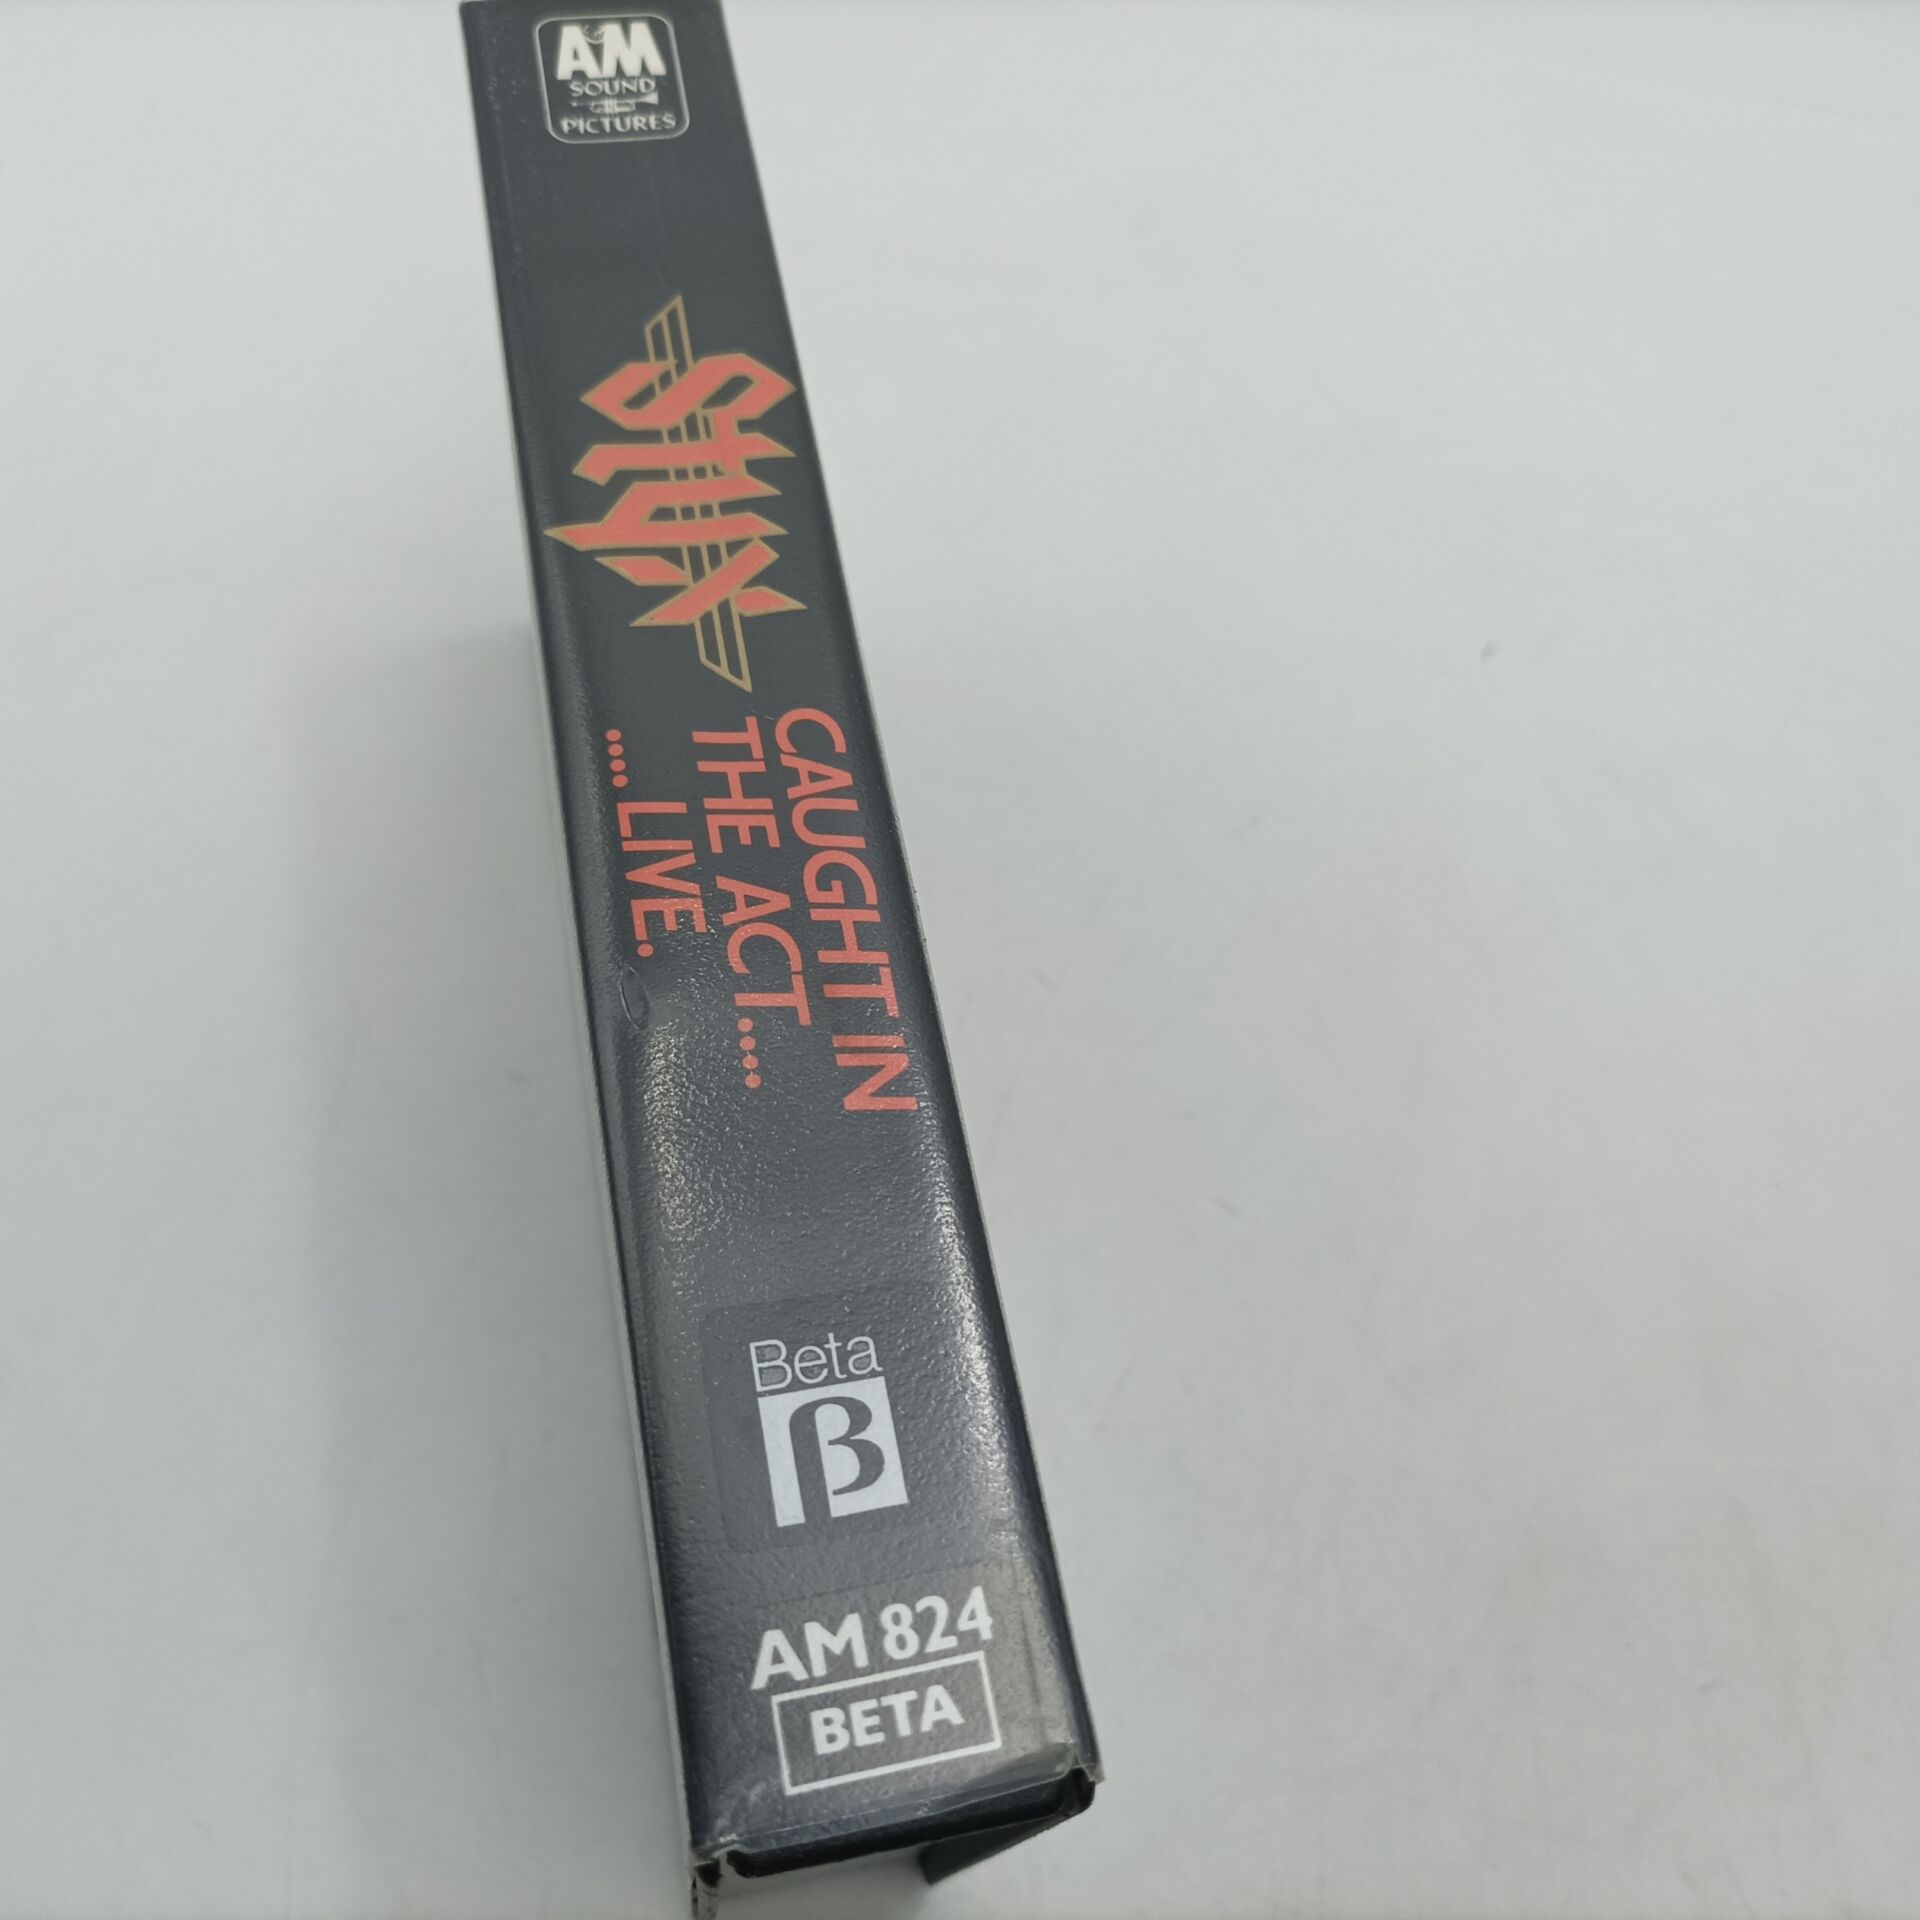 Styx – Caught in the Act Live (1984) Betamax Video [G+] UK PAL